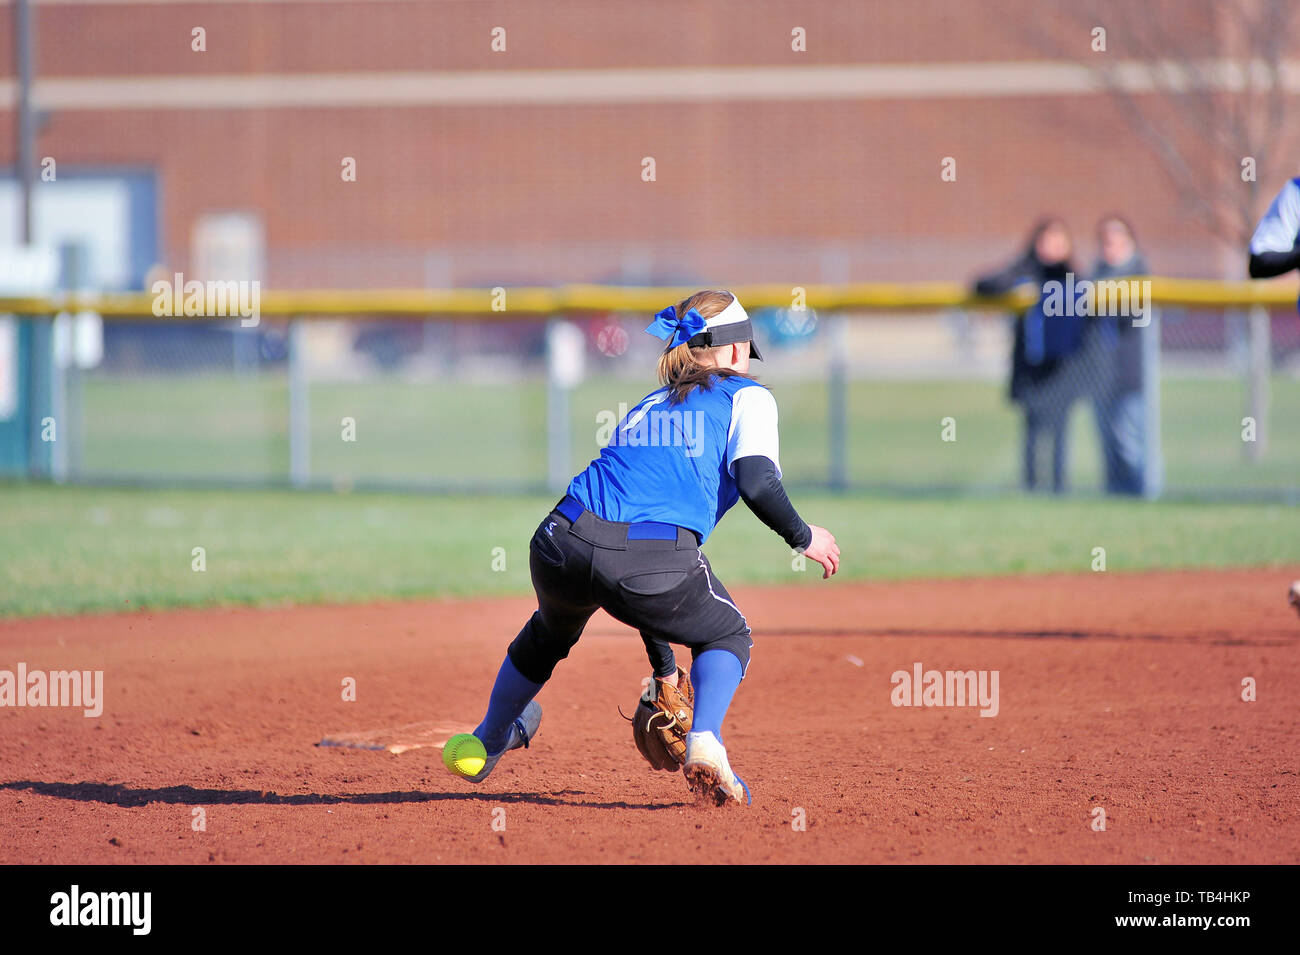 Shortstop unable to successfully field a ground ball that went through her legs for an error. USA. Stock Photo